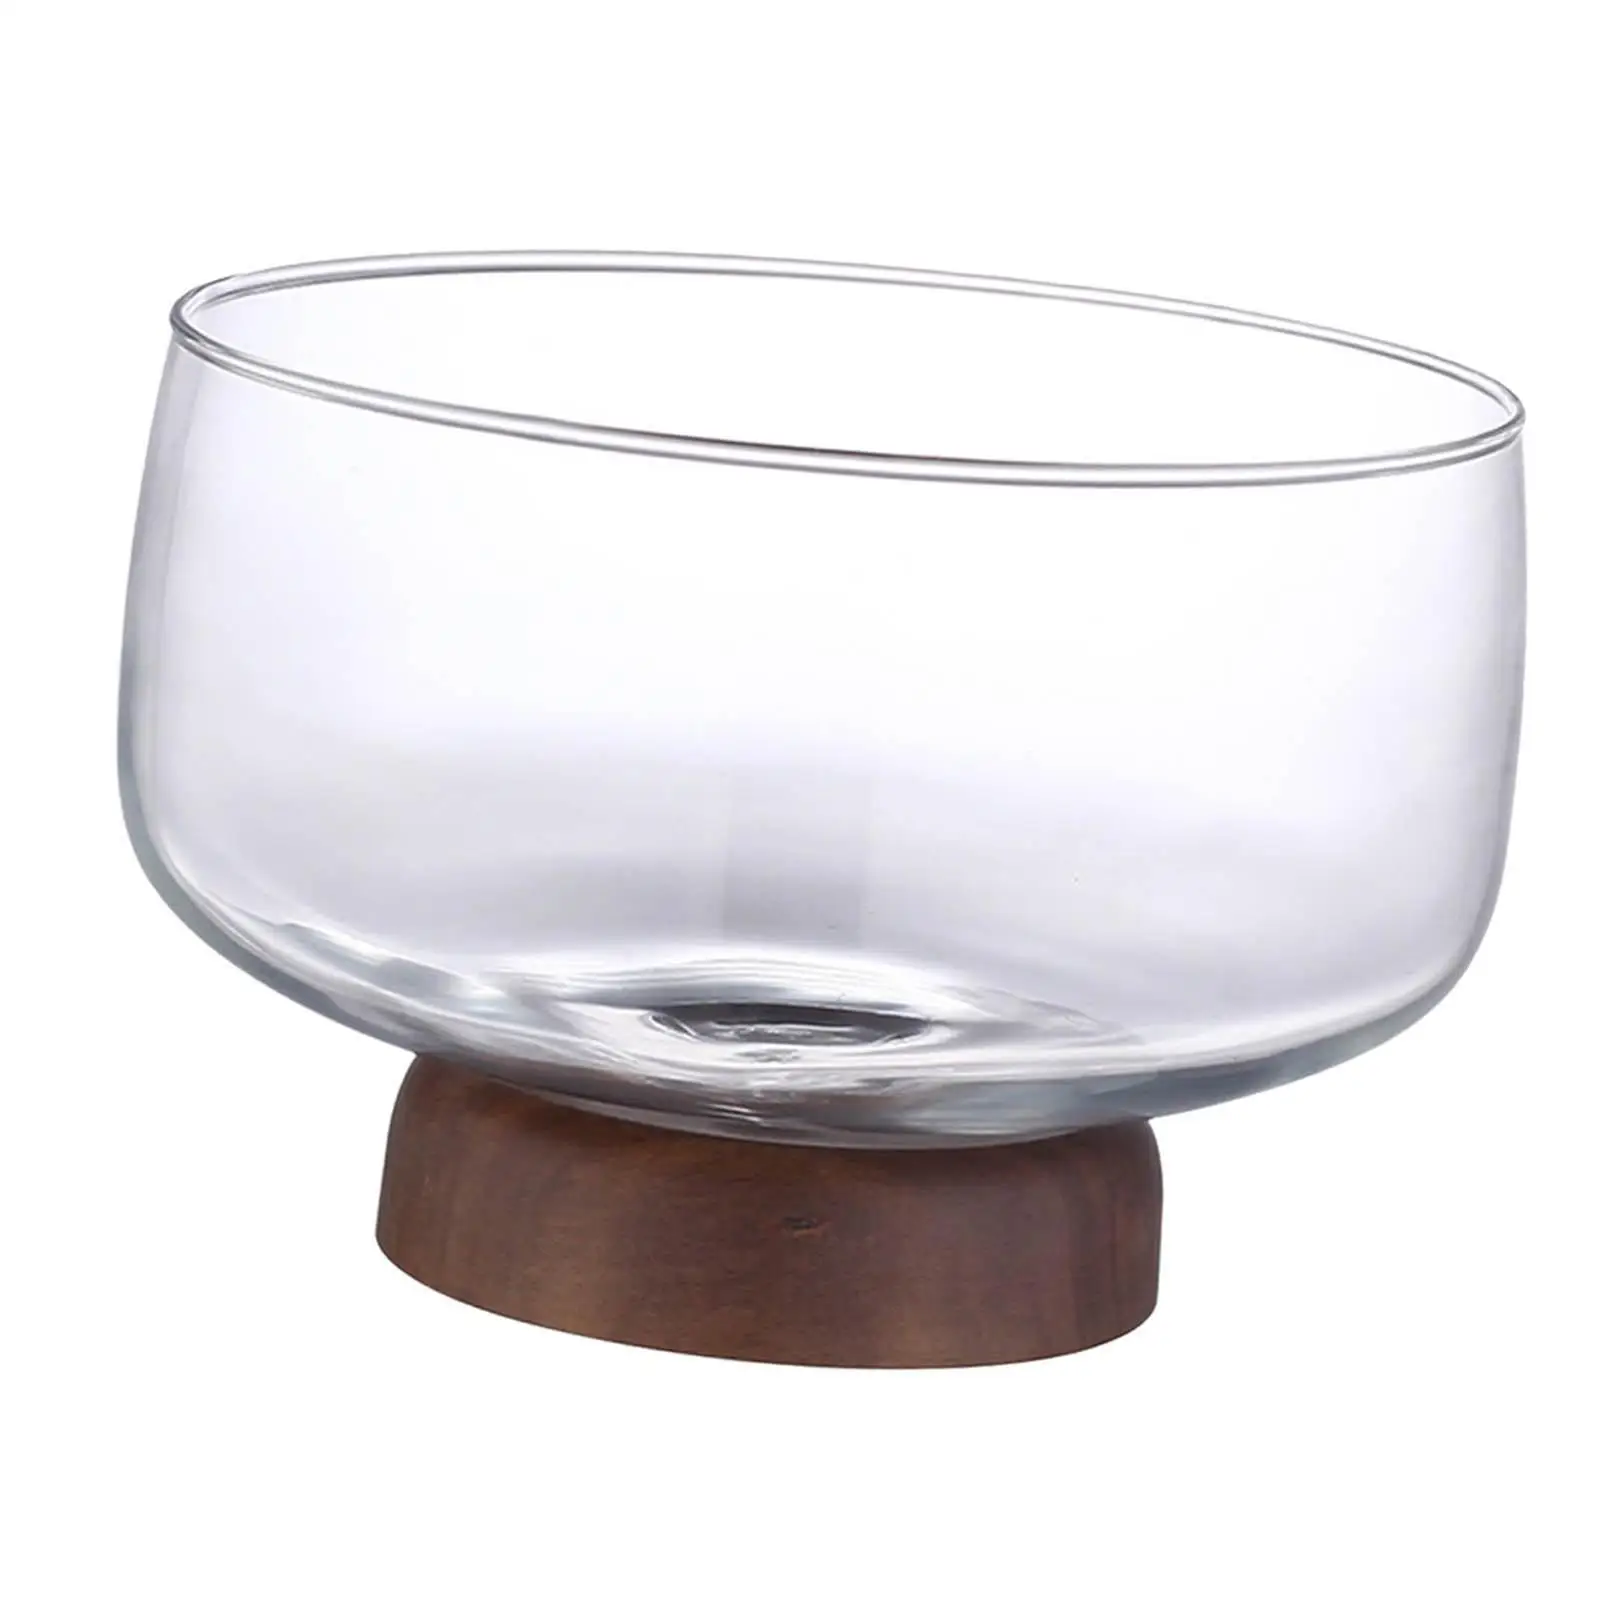 Japanese Style Glass Fruit Bowl High Footed Fruit Tray Serving Bowl Dish Centerpiece Bowl for Candy Salad Fruit Snack Vegetables